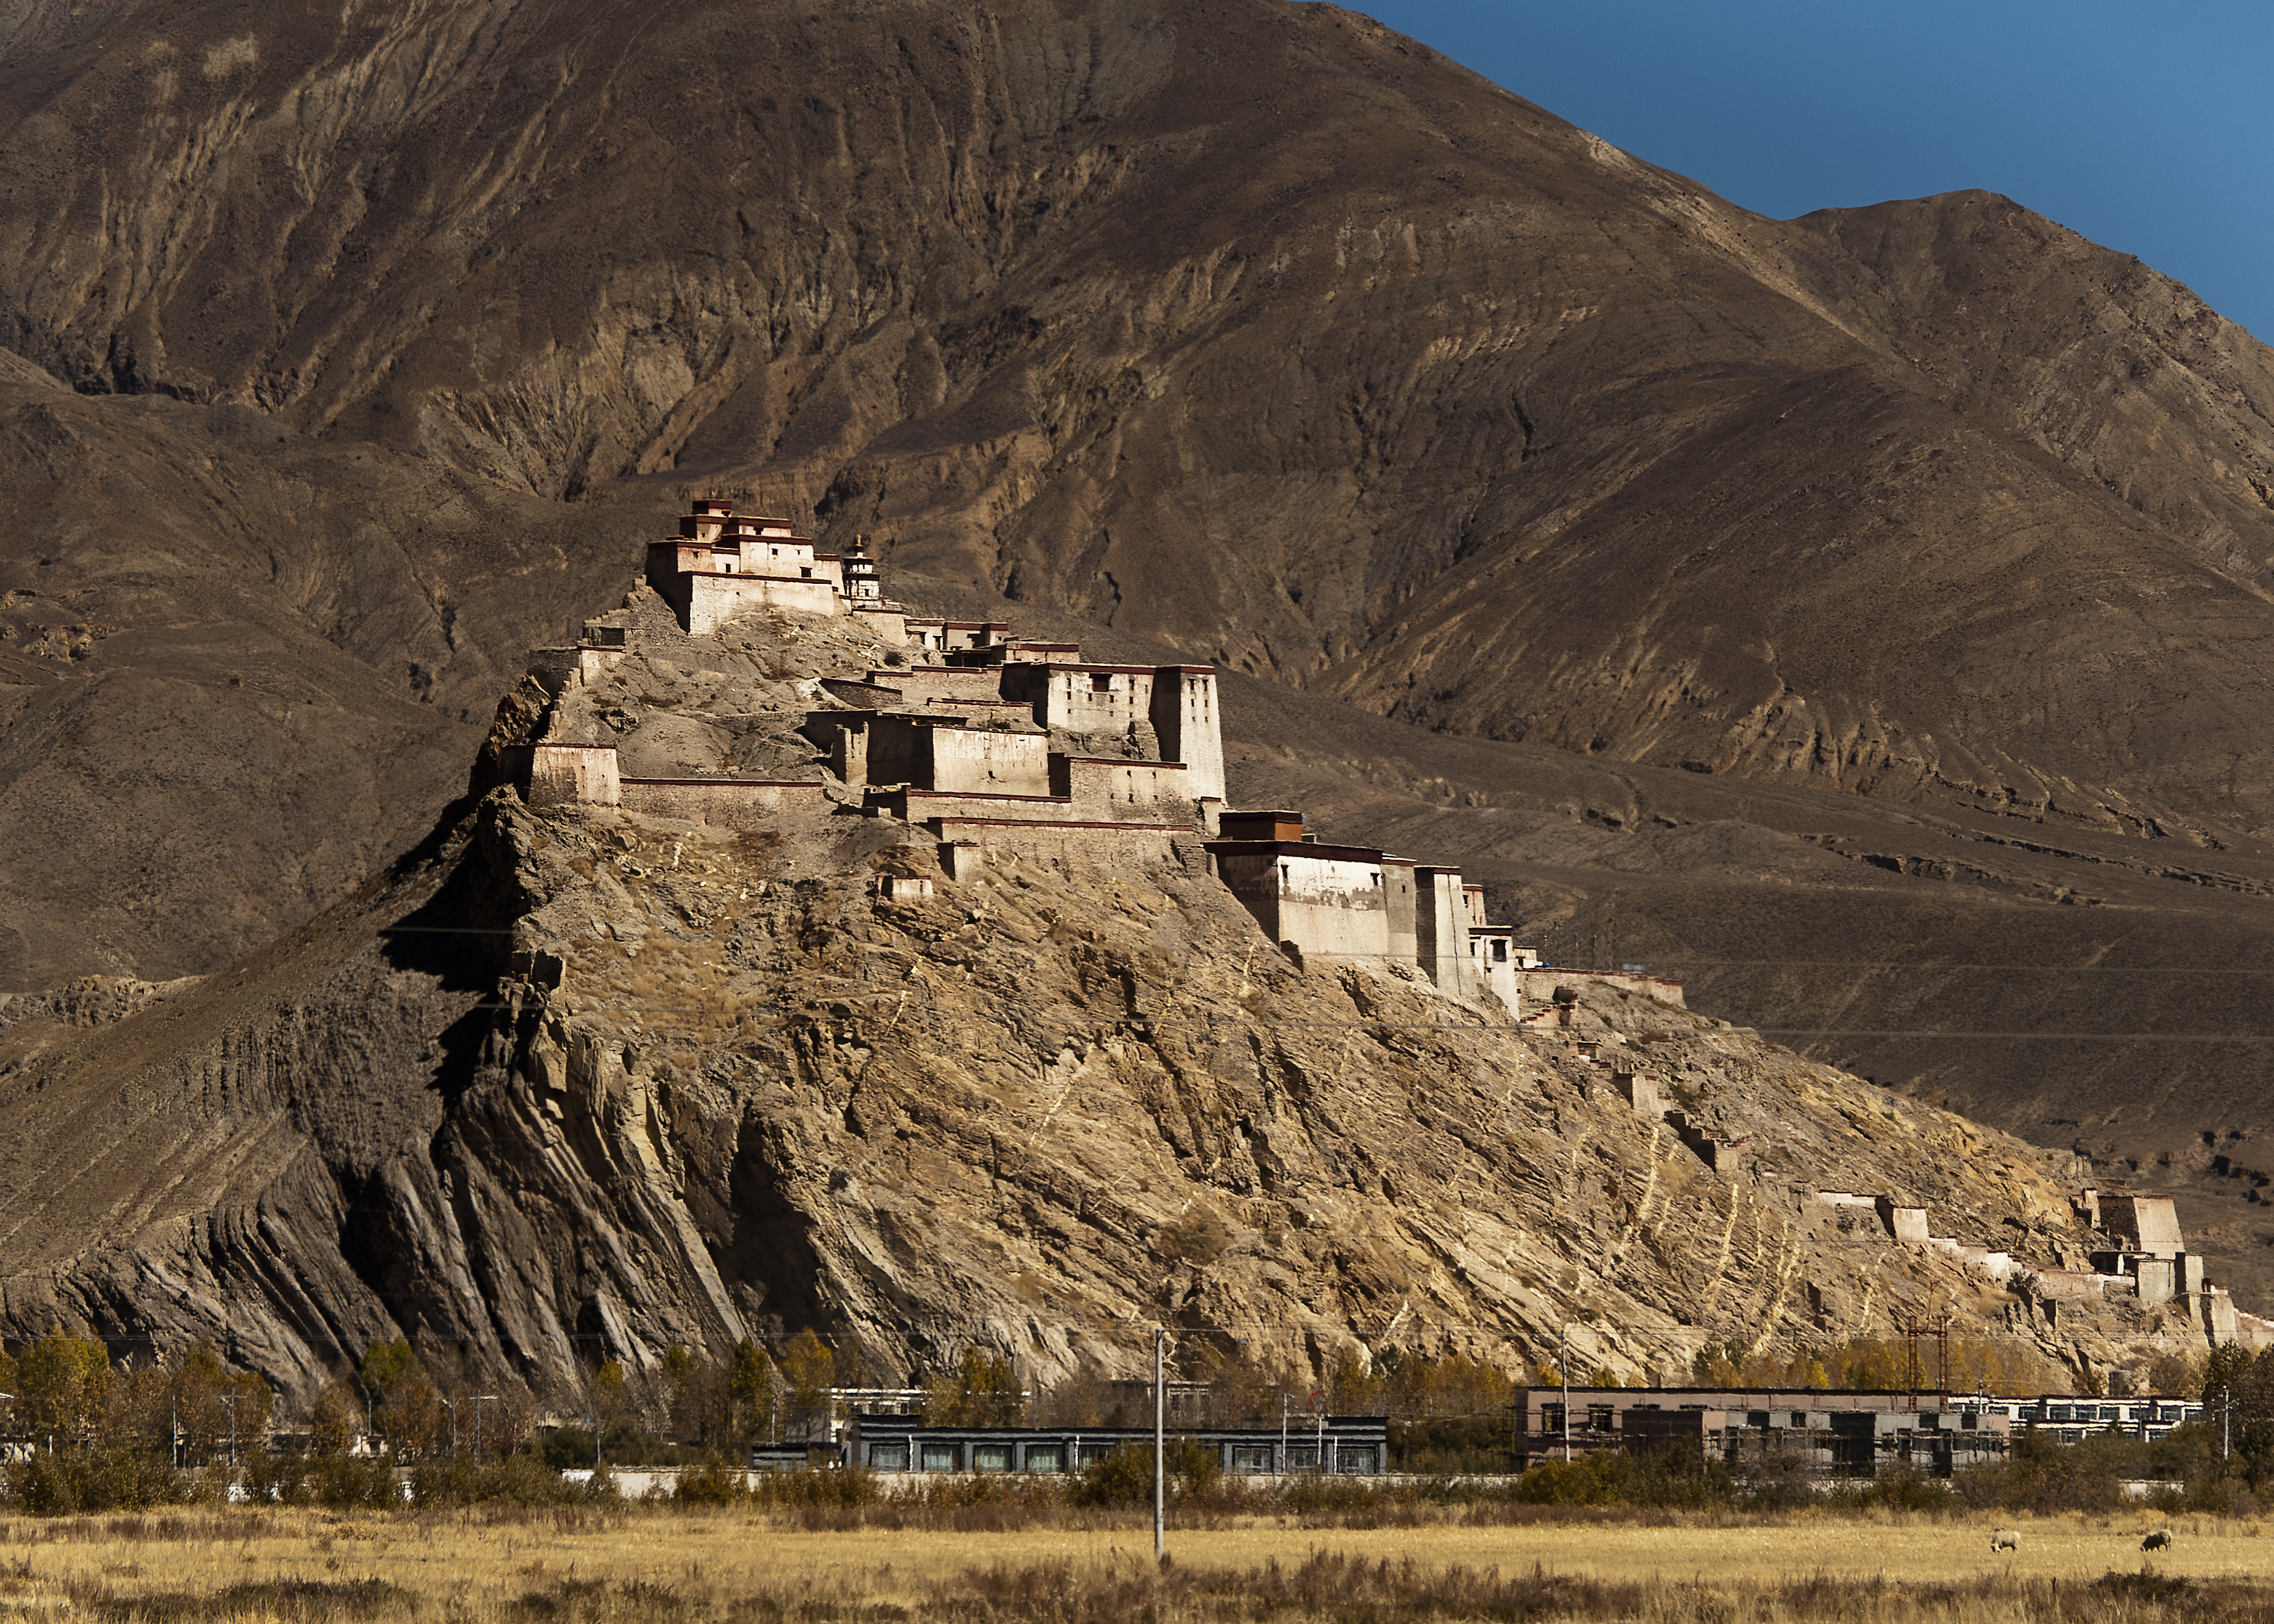 Drive to Gyangtse. Afternoon sightseeing and overnight at Gyantse'